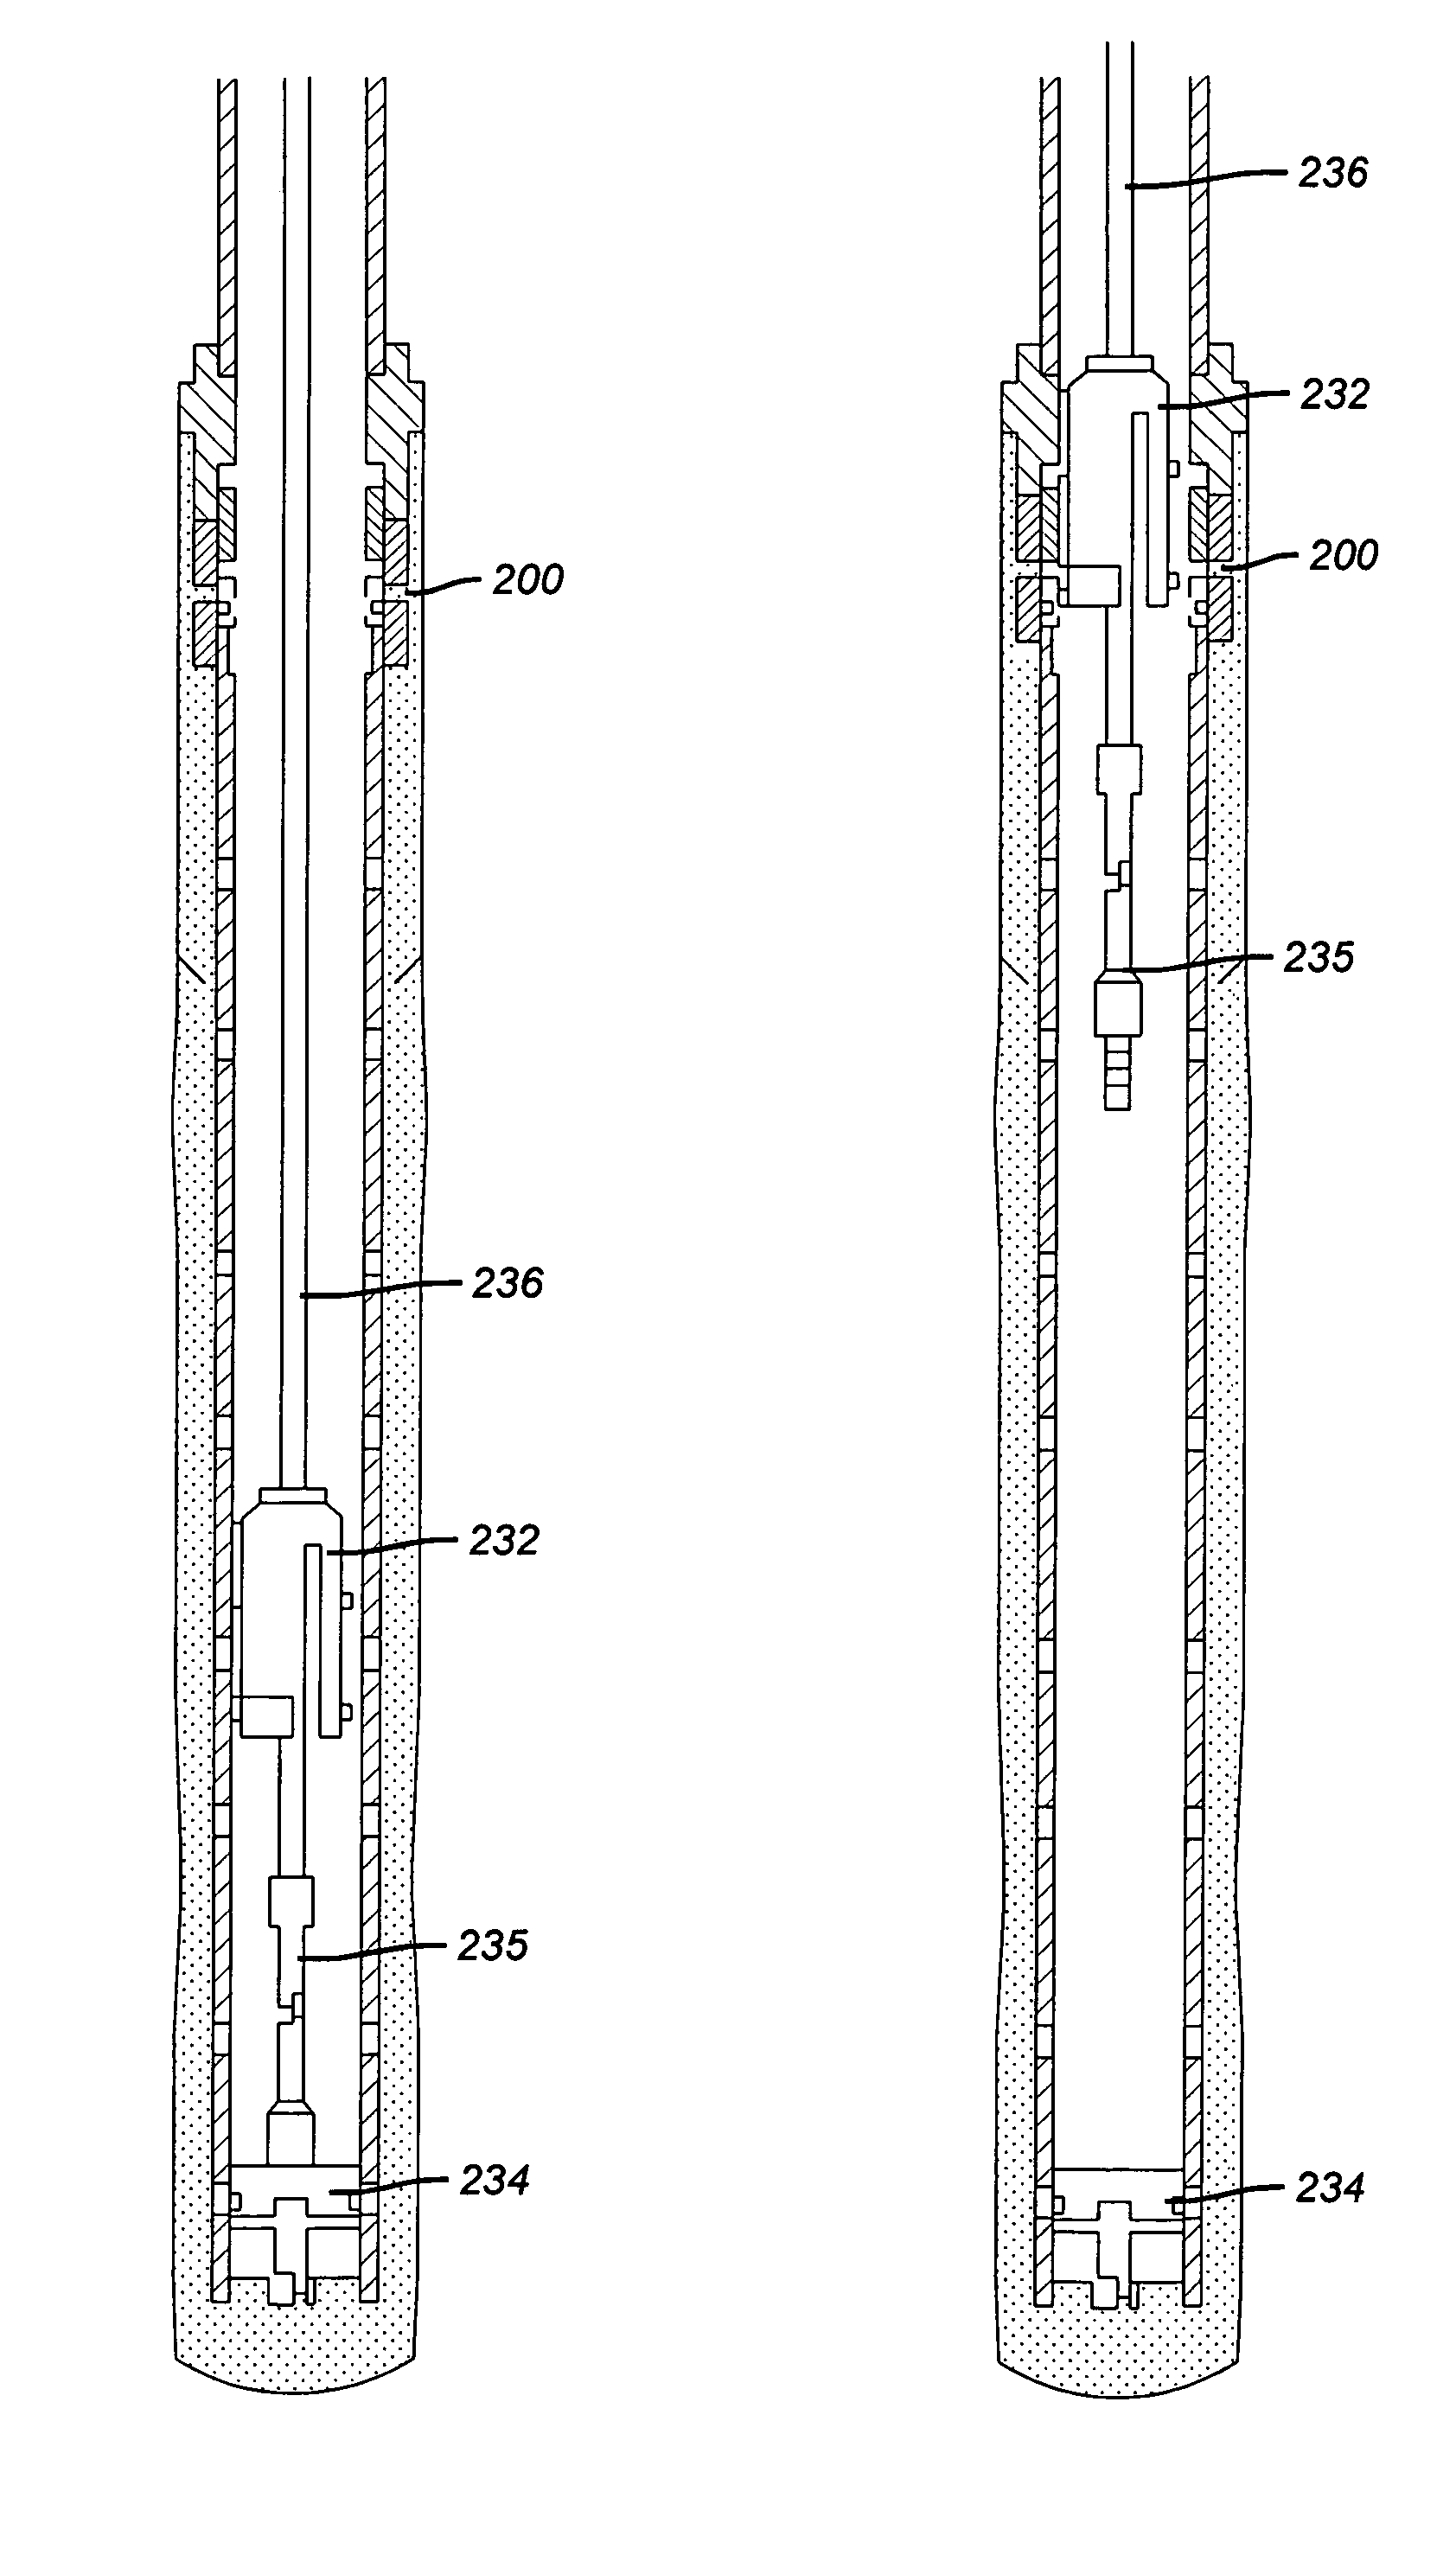 One trip cemented expandable monobore liner system and method